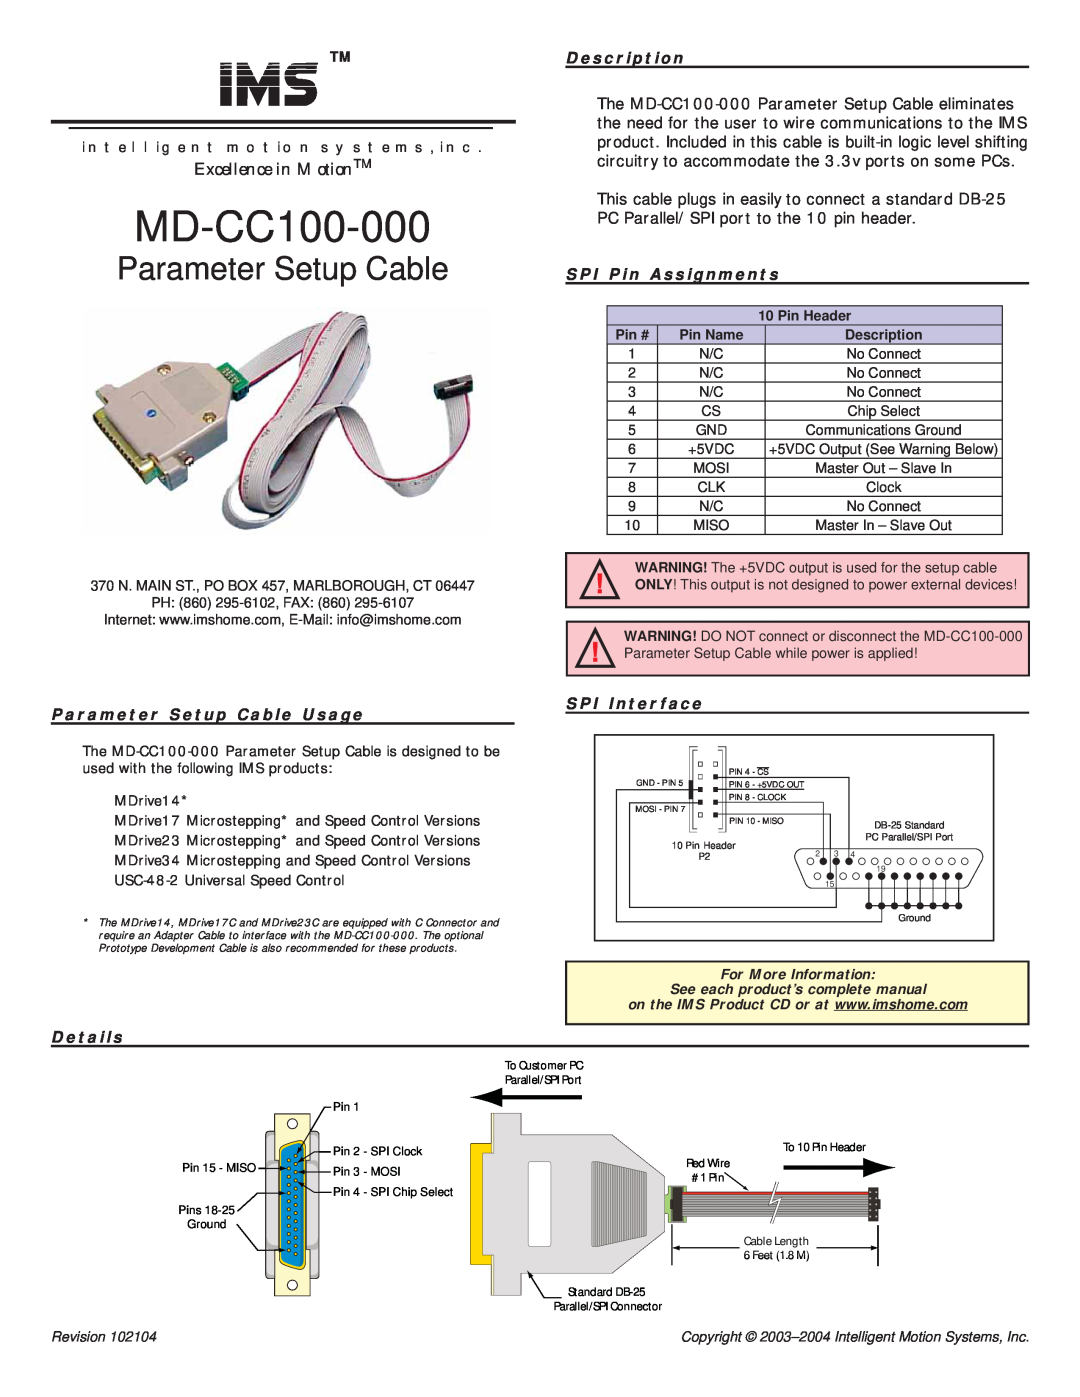 Intelligent Motion Systems MD-CC100-000 manual Parameter Setup Cable, Excellence in MotionTM, D e s c r i p t i o n 